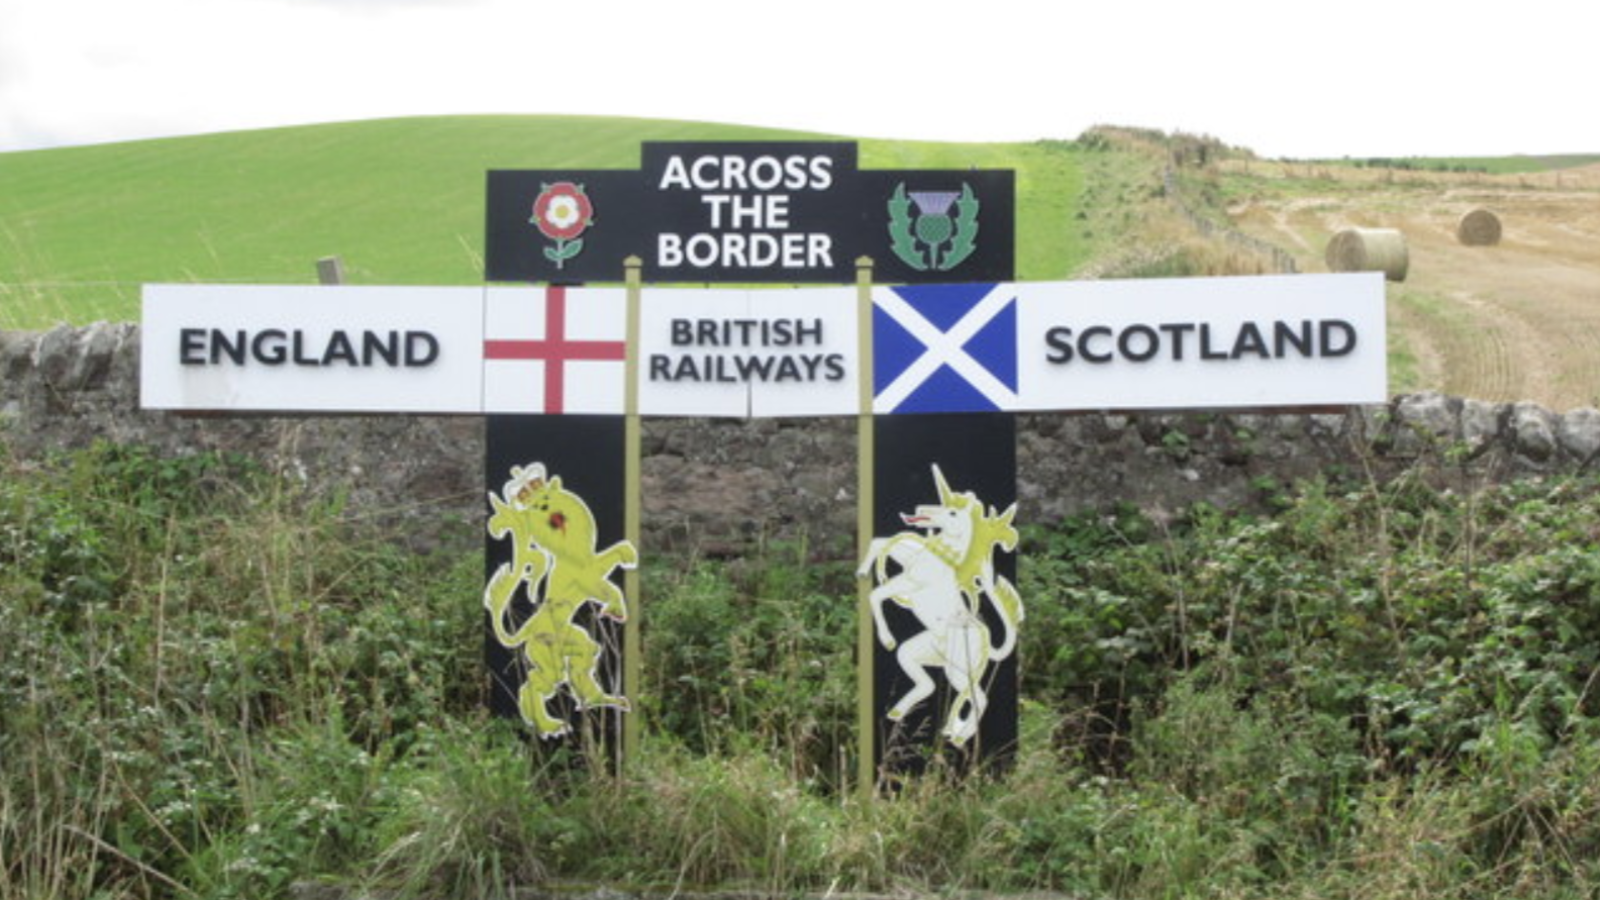 Signpost at the border of England and Scotland.